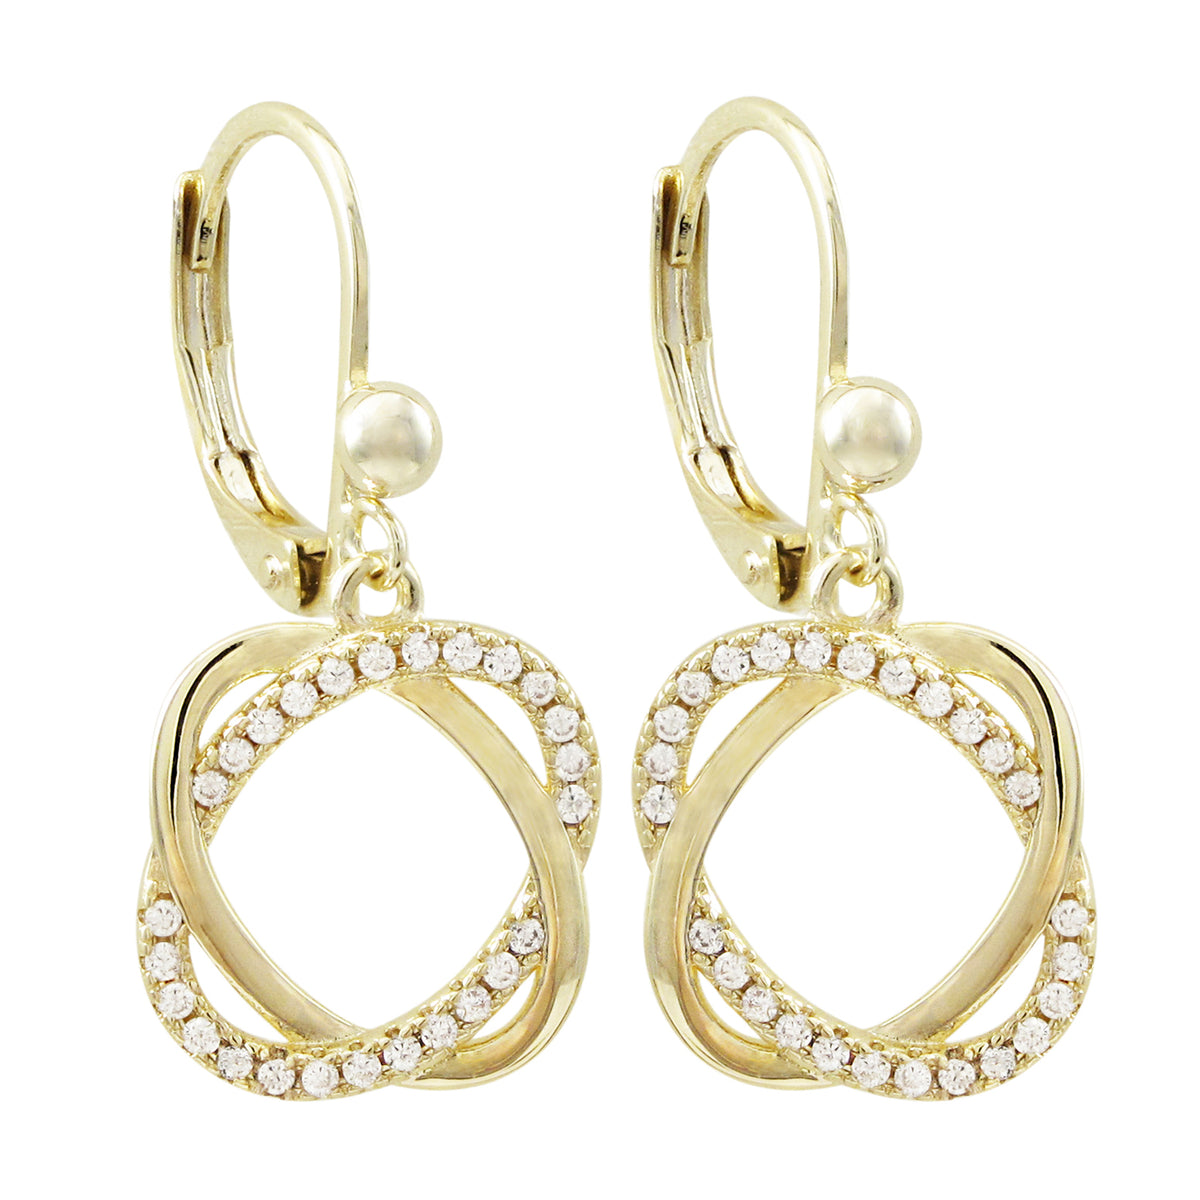 Surgical Steel Overlapping Oval Cz Stone Earrings